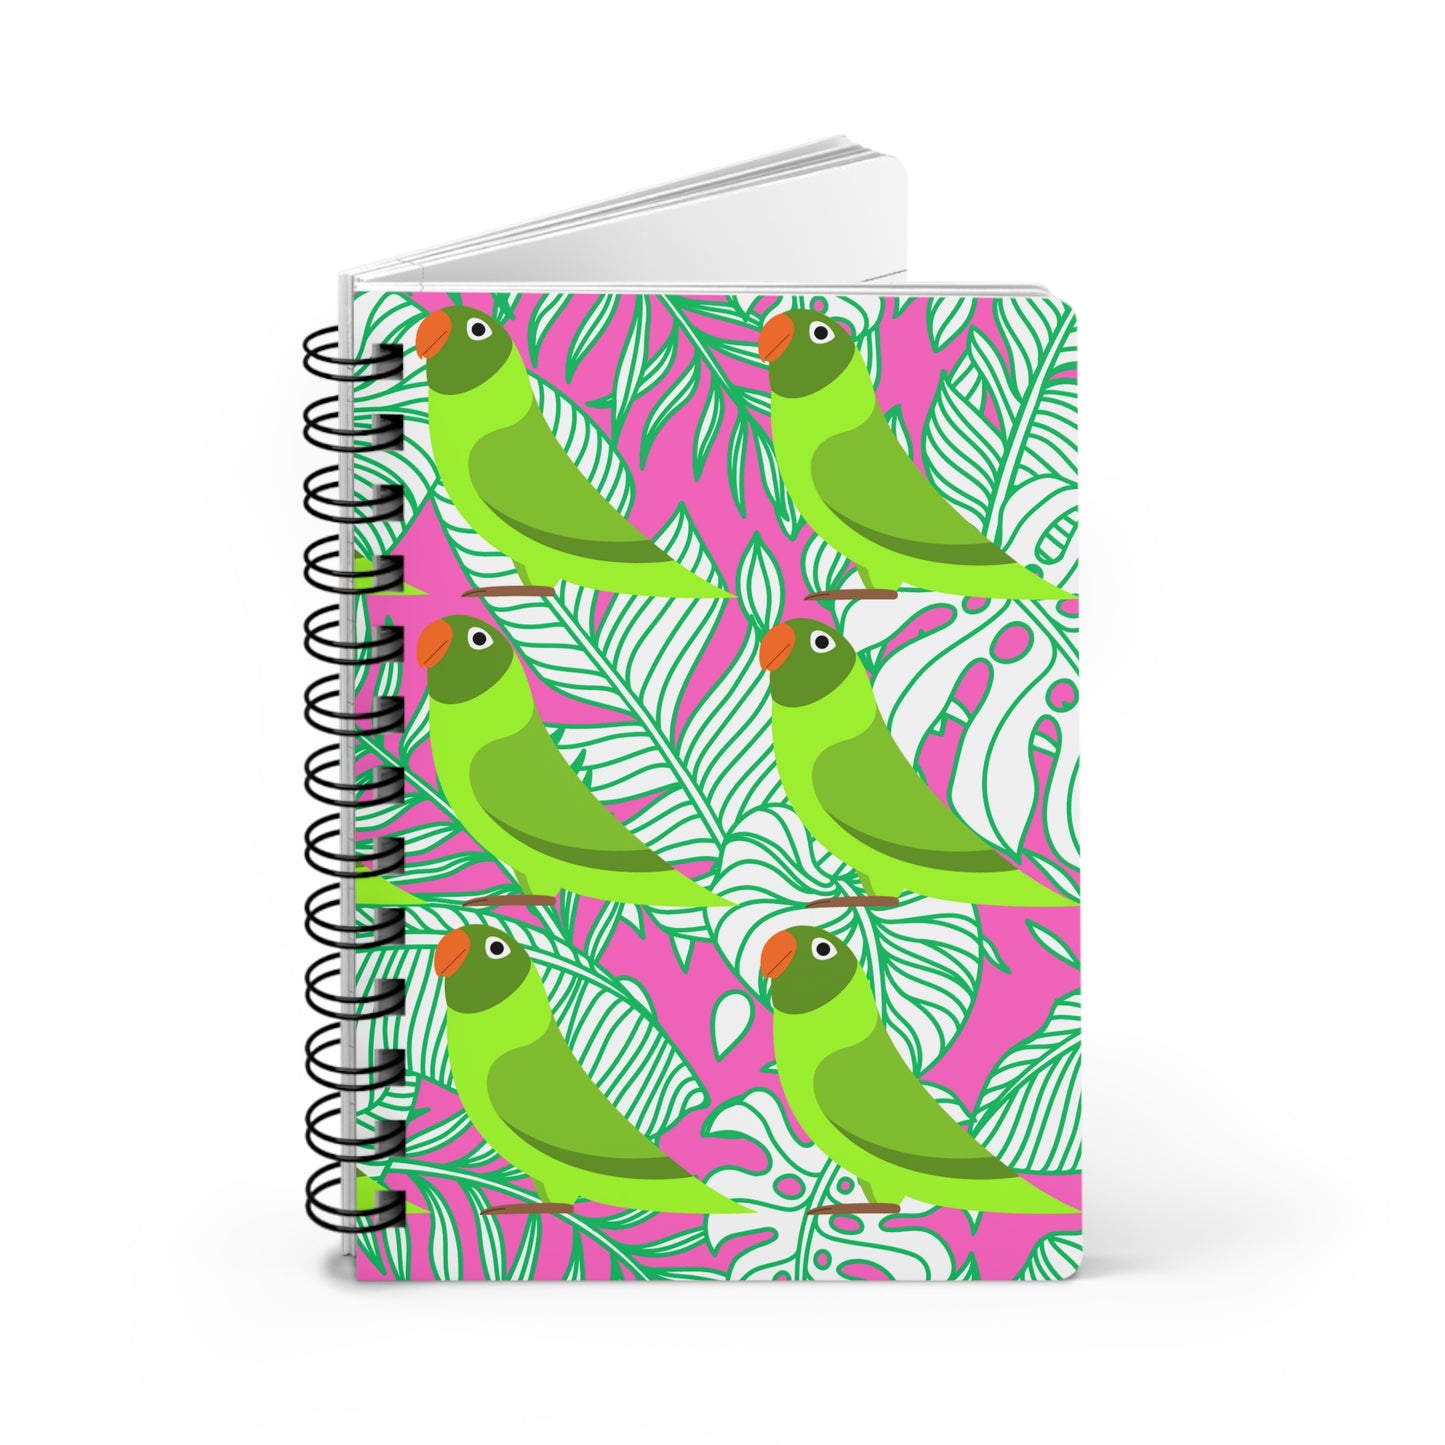 Parrots of Palm Beach Tropical Hot Pink Writing Sketch Inspiration Travel Spiral Bound Journal